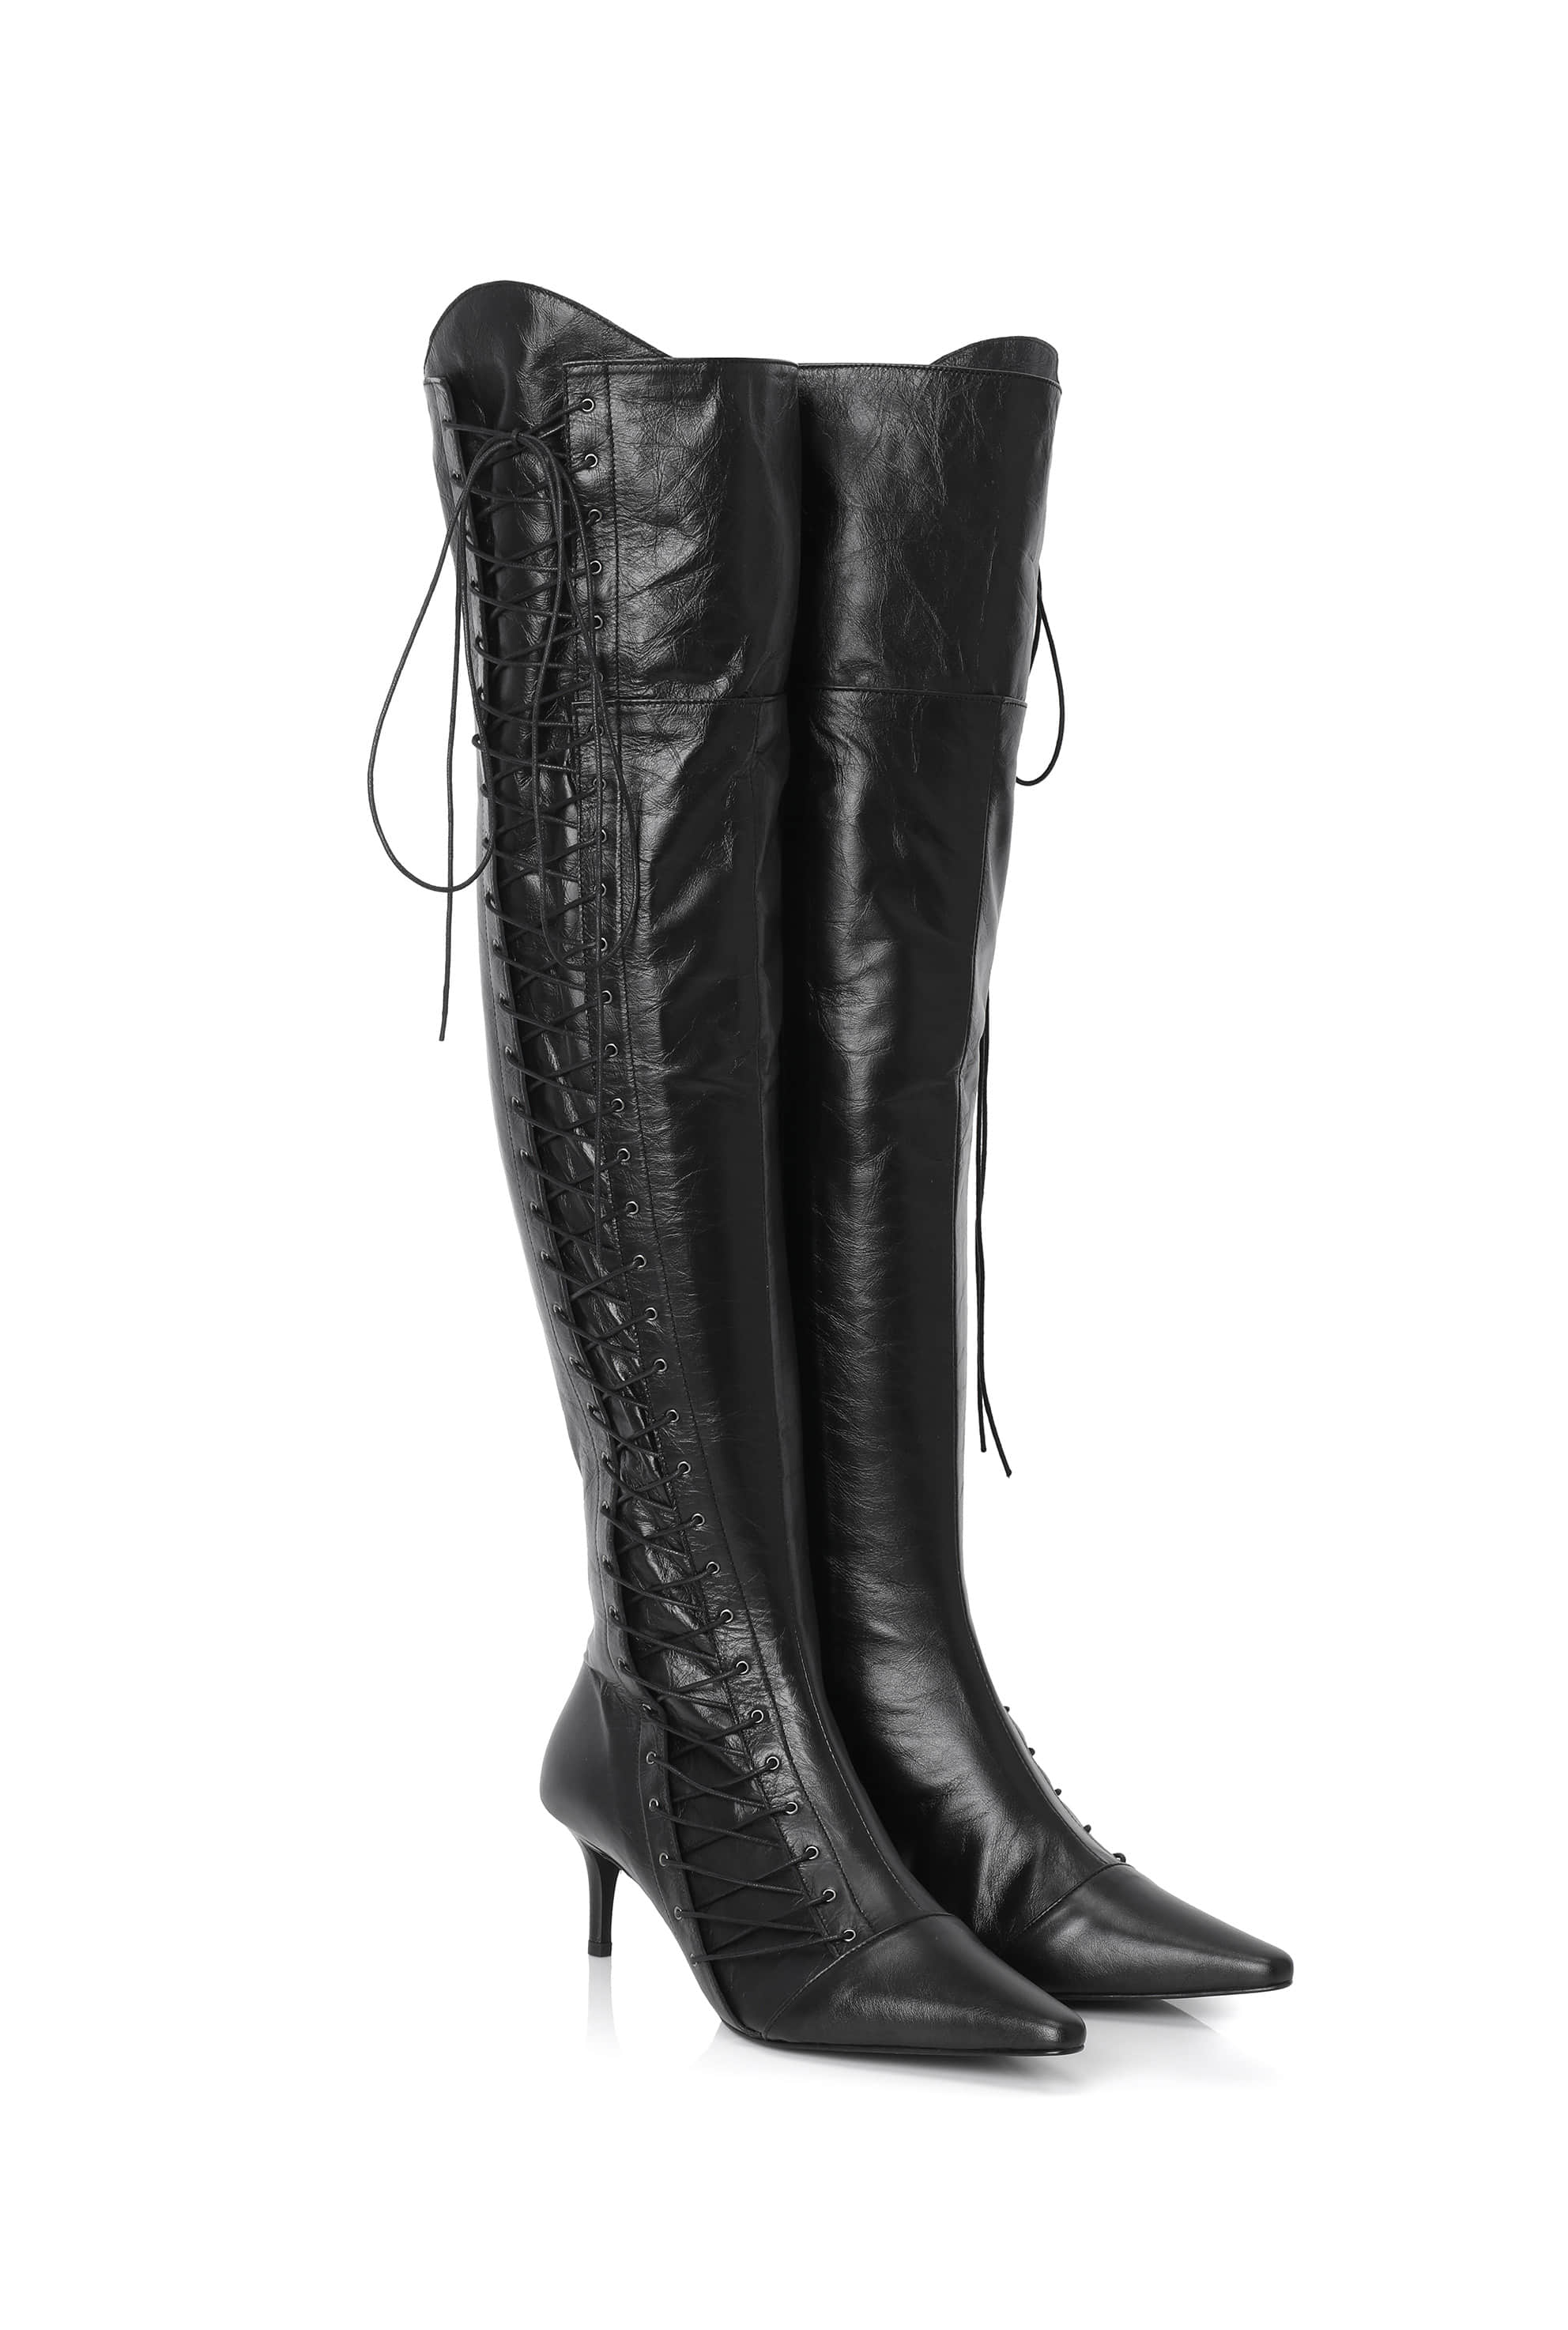 Eyelet lace-up knee high boots